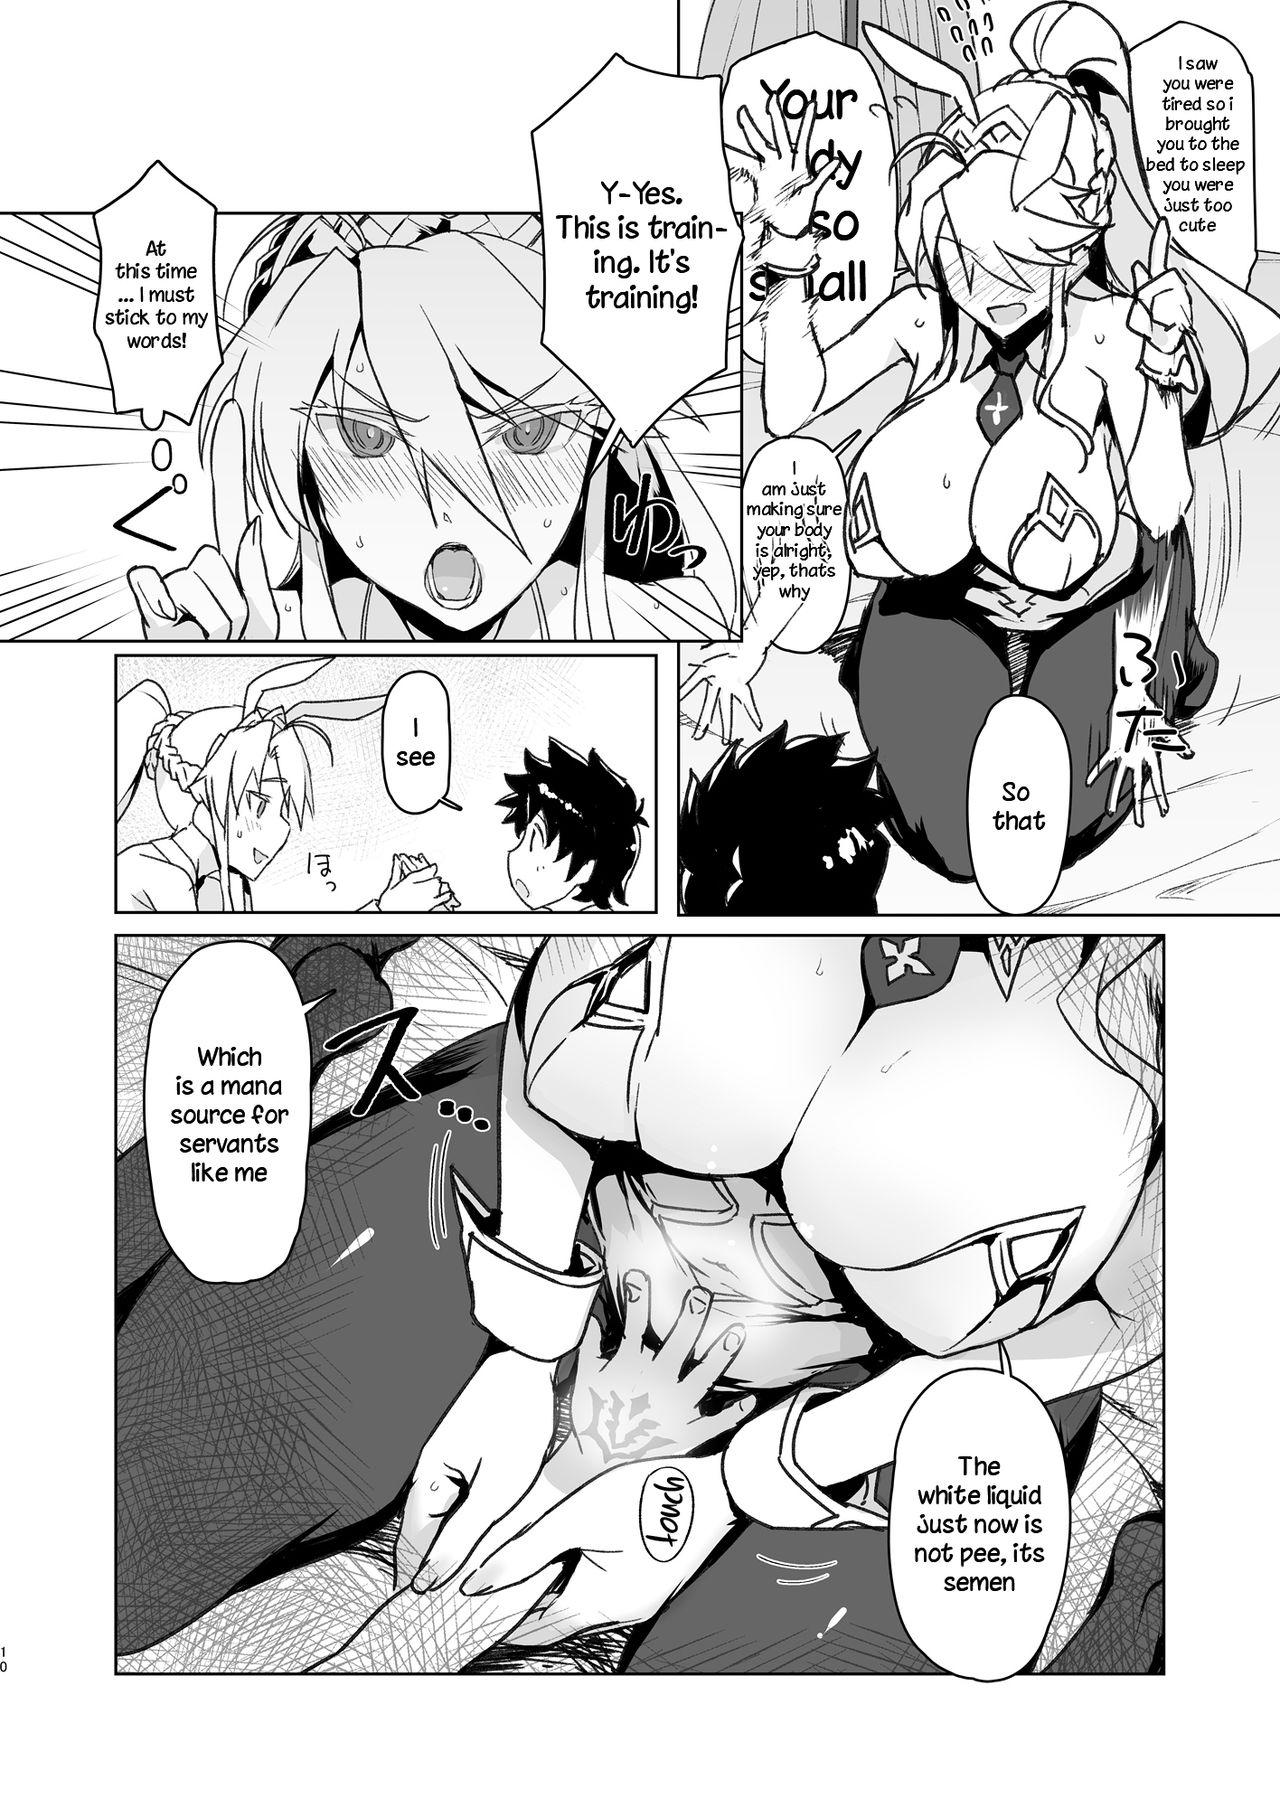 HD Melancholic Summer - Fate grand order Reversecowgirl - Page 9